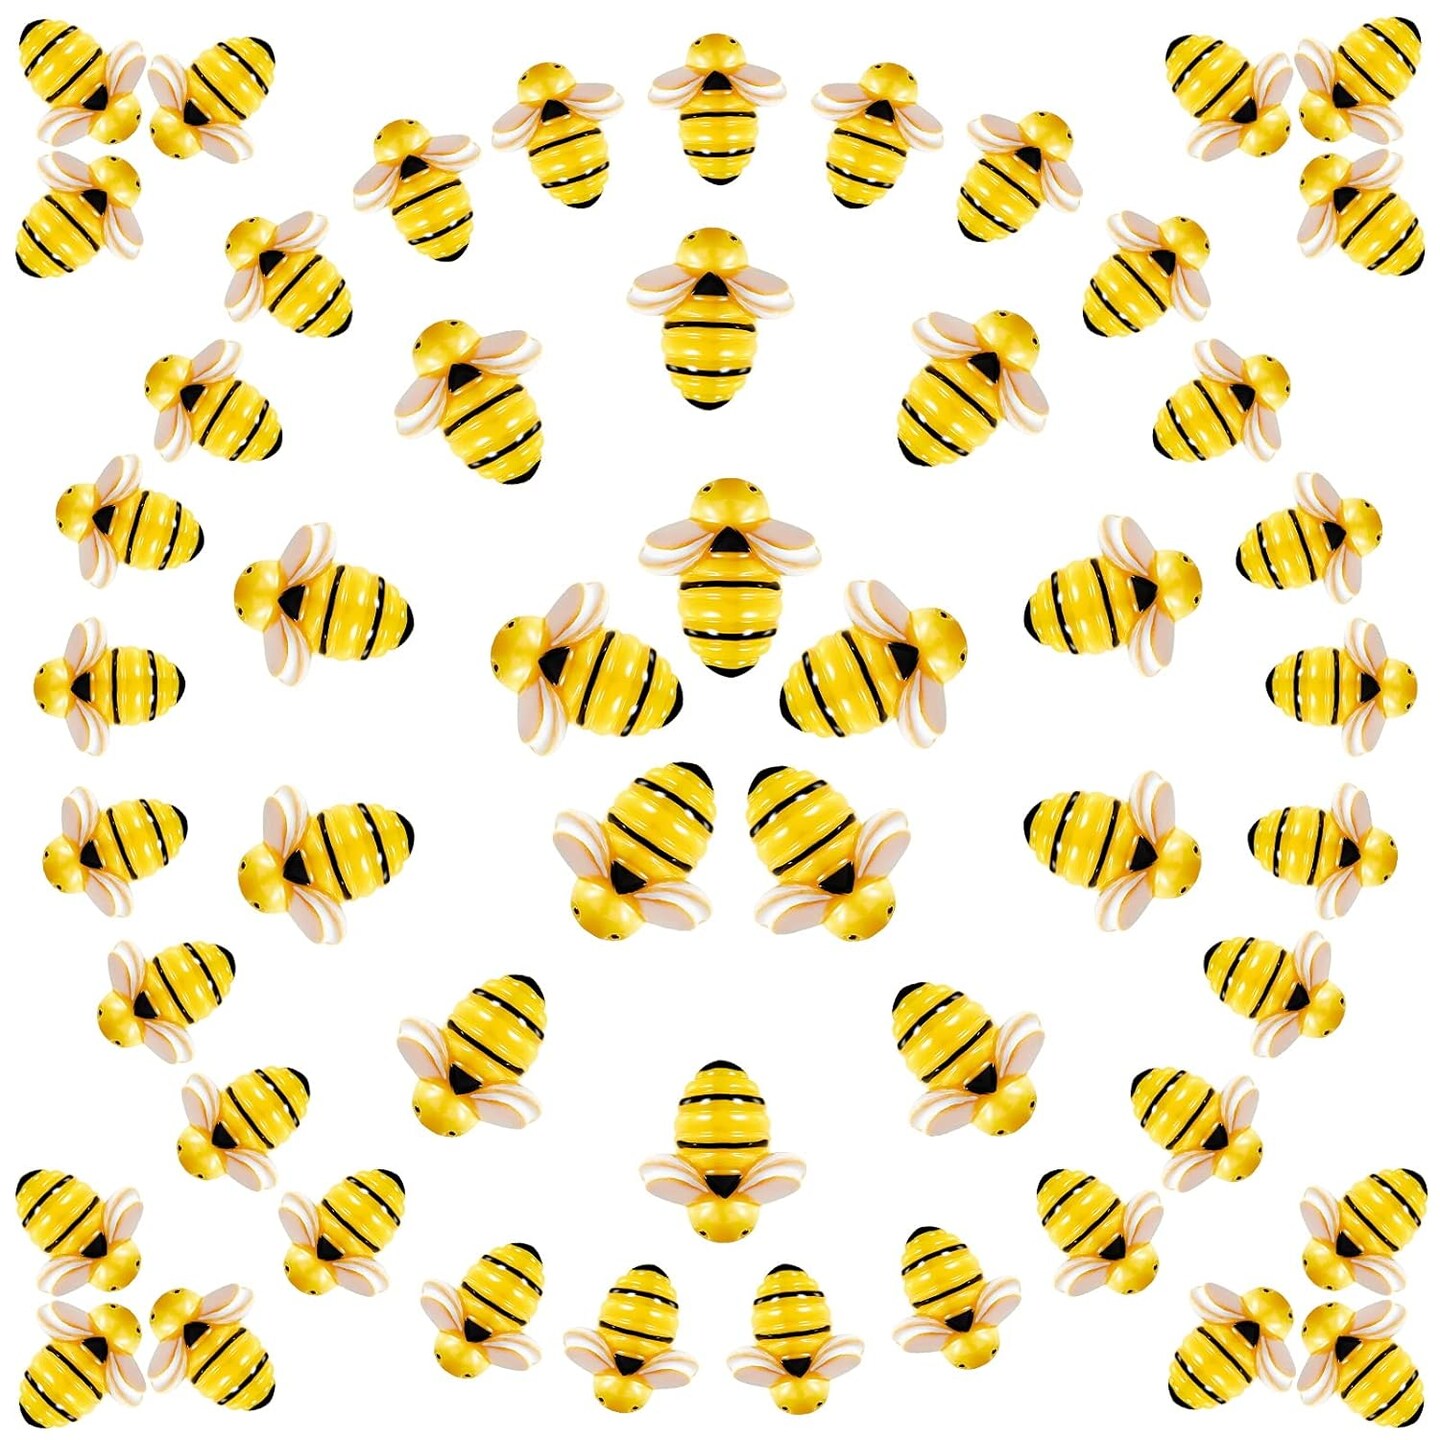 20 Pieces Tiny Resin Bees Decor Bee Shaped Craft Embellishment Tiny Resin Bee Embellishments Flatback Bee Pieces Decorations for Art and Crafts DIY Party Decor, 0.98 Inch, 0.74 Inch, 0.55 Inch